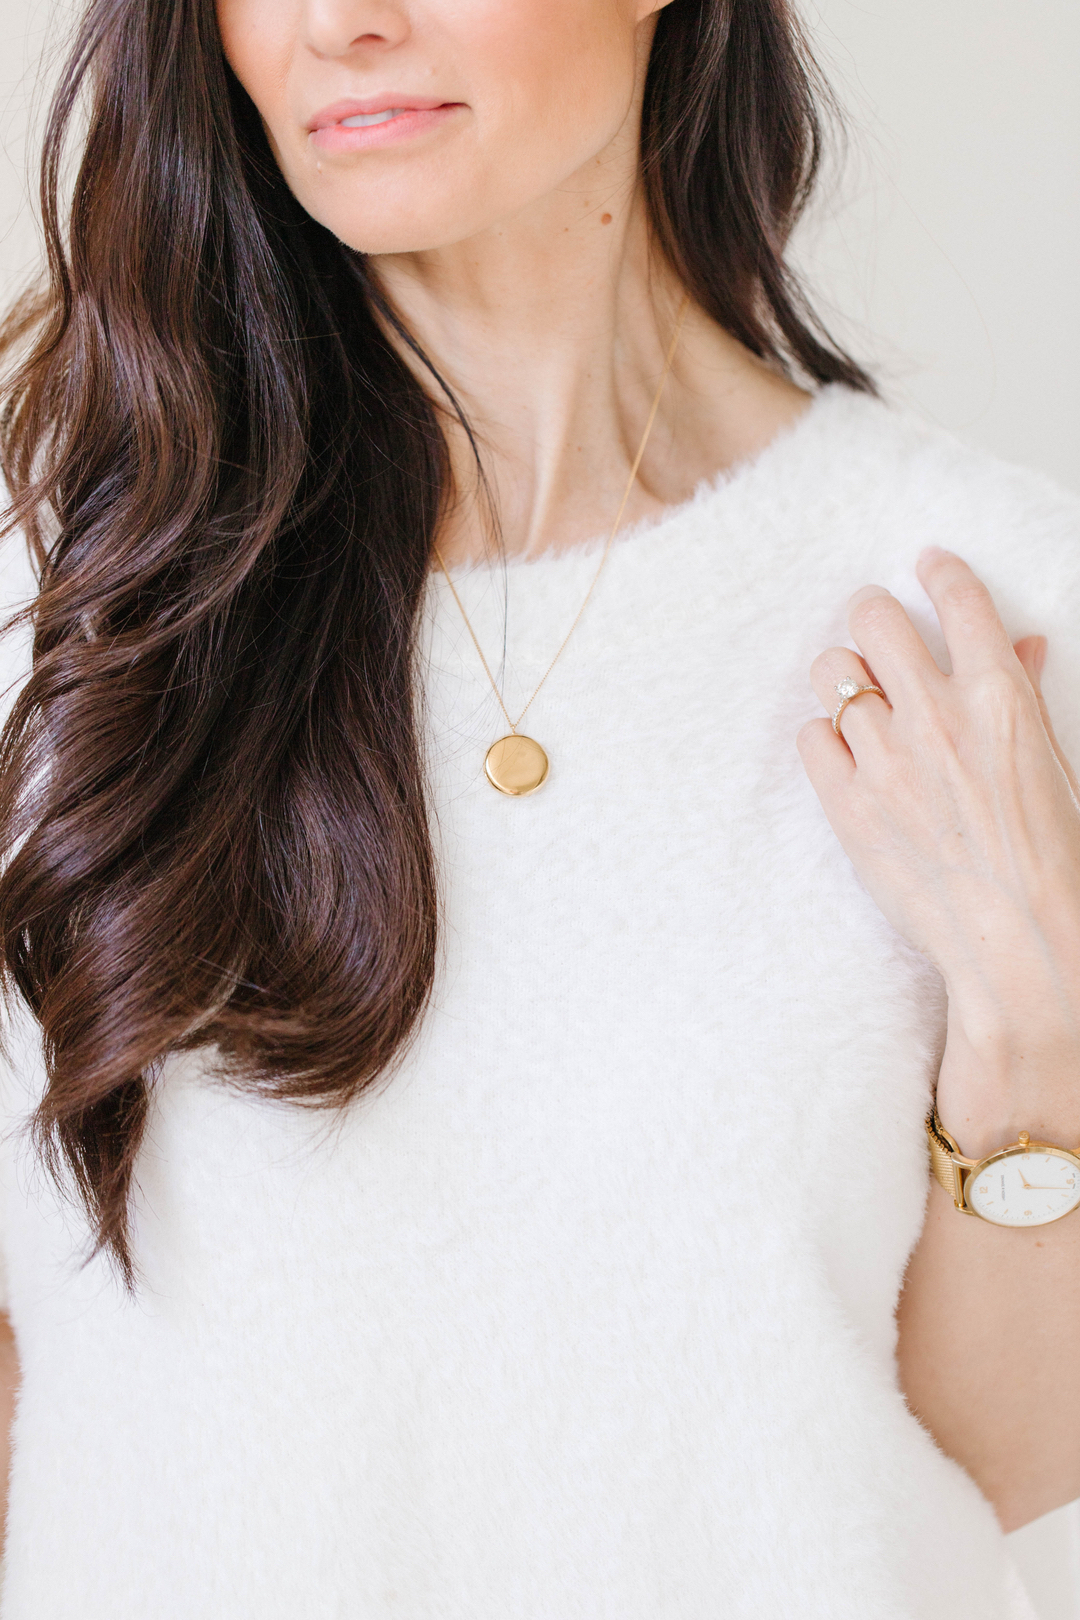 Tori Wesszer wearing the Inspire locket in gold from So Pretty Cara Cotter 